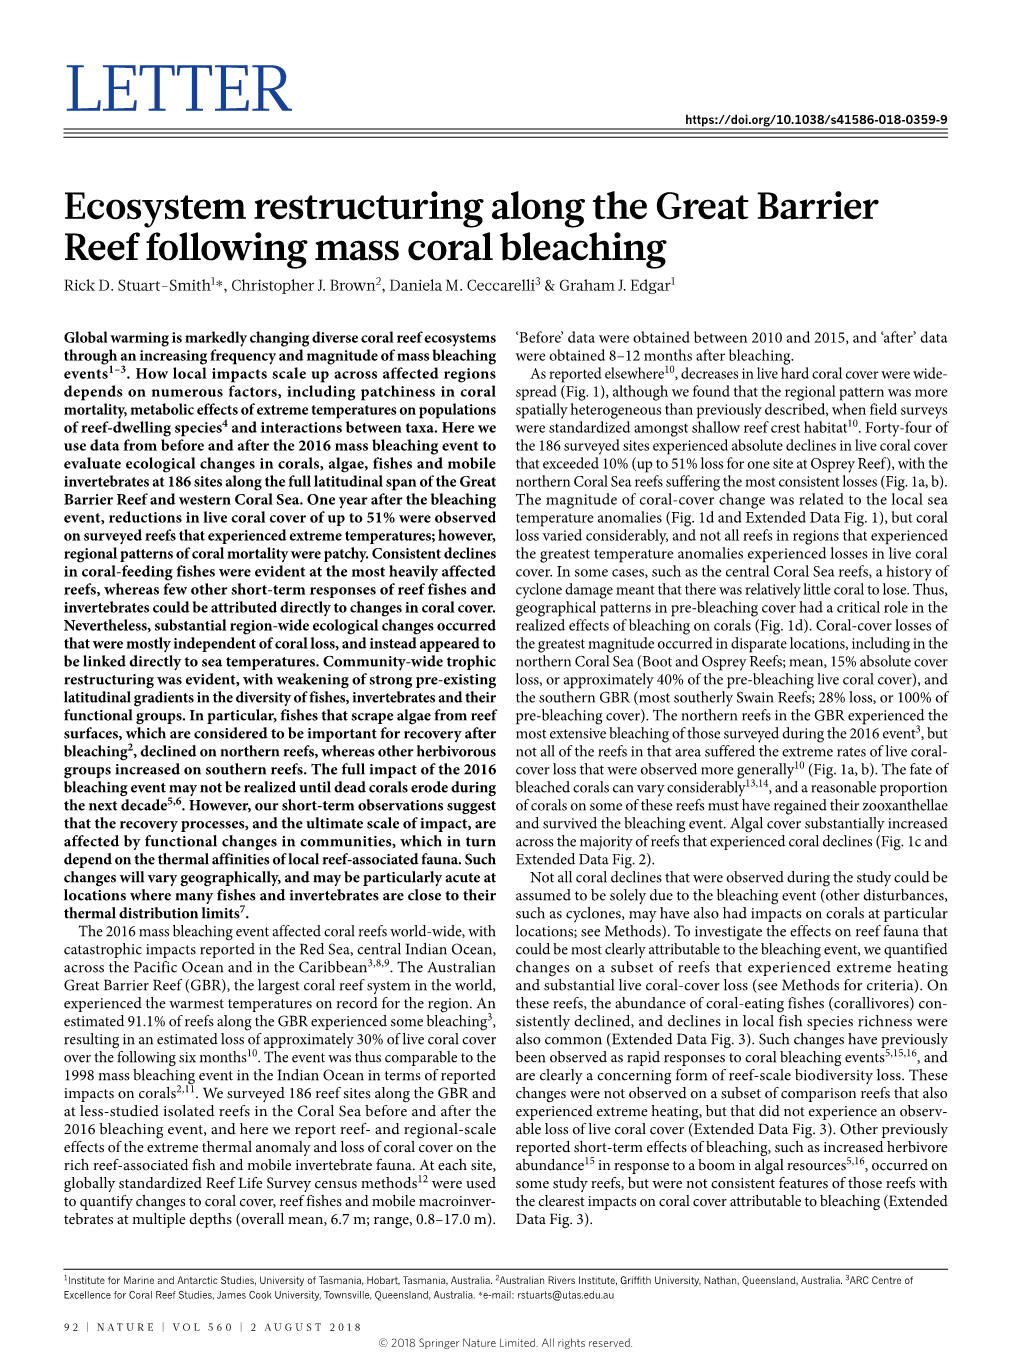 Ecosystem Restructuring Along the Great Barrier Reef Following Mass Coral Bleaching Rick D